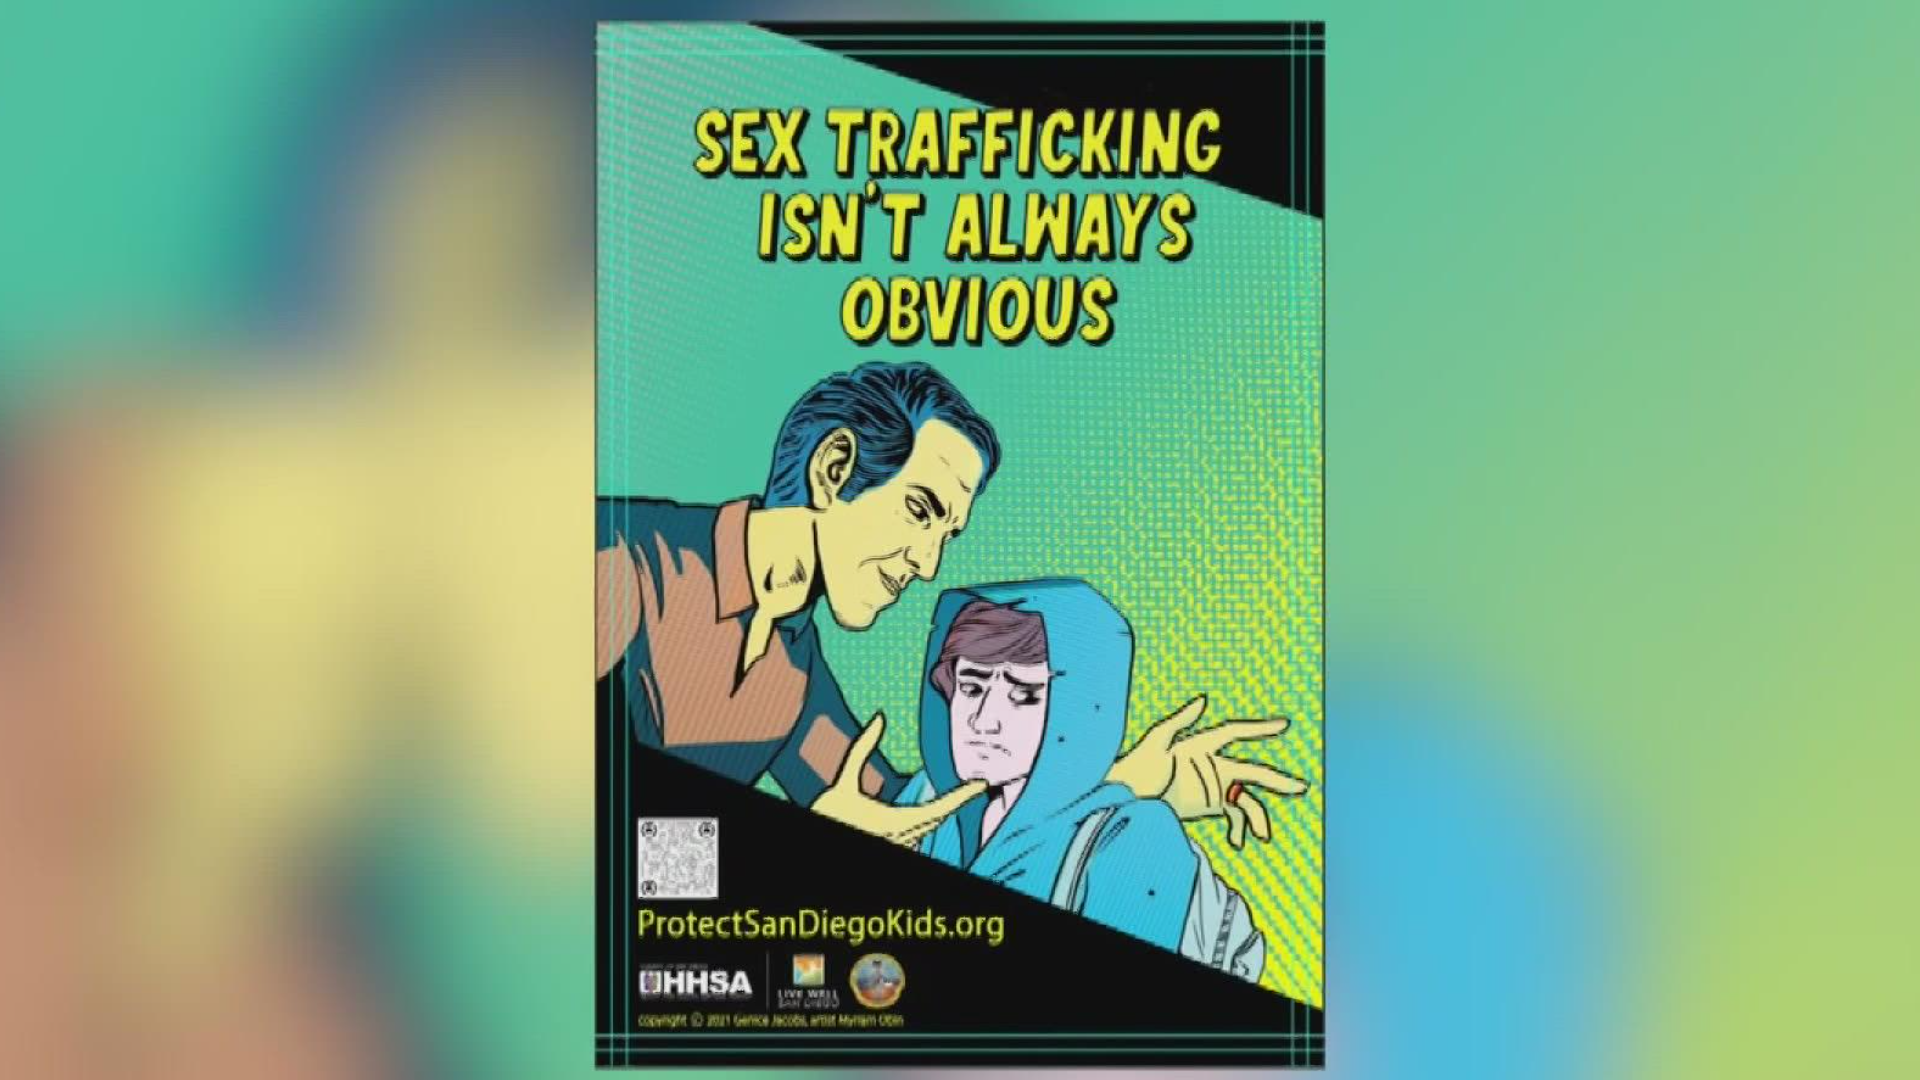 San Diego County D.A. kicks off campaign to raise awareness about boys who are vulnerable to sex trafficking.